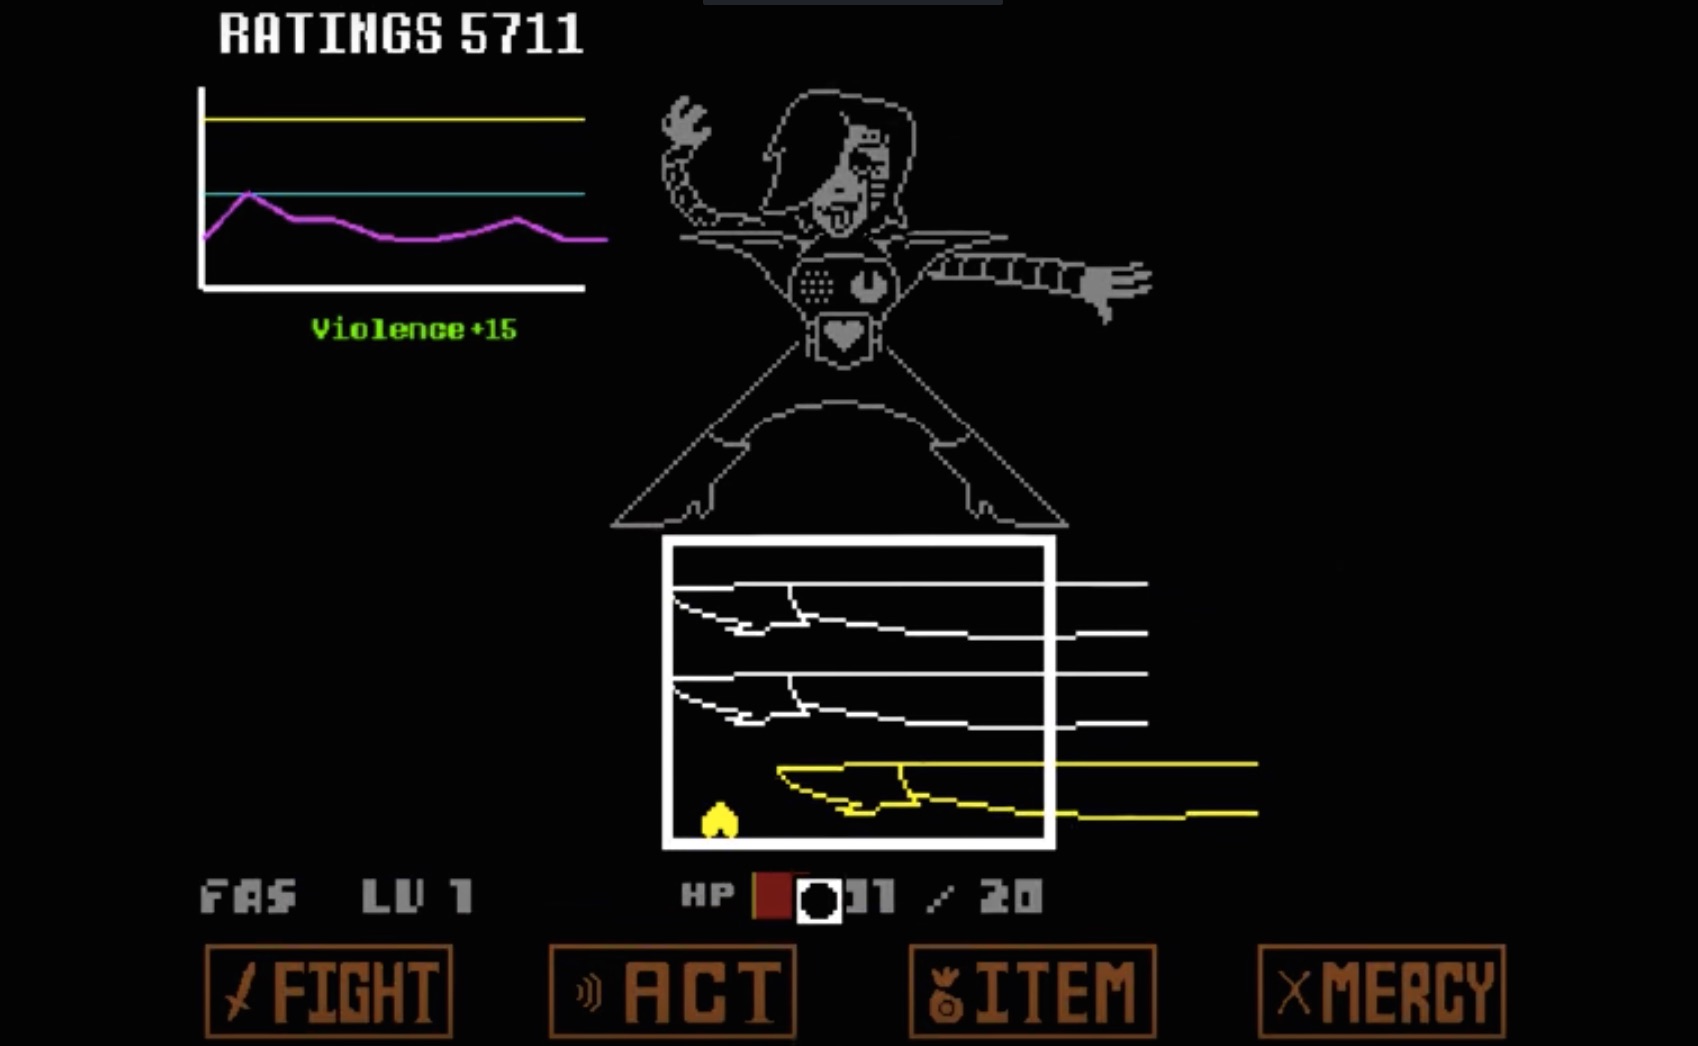 The character Mettaton is in the center of the screen. Below him, the player navigates a small yellow heart in a white box where legs with high-heeled shoes are falling.